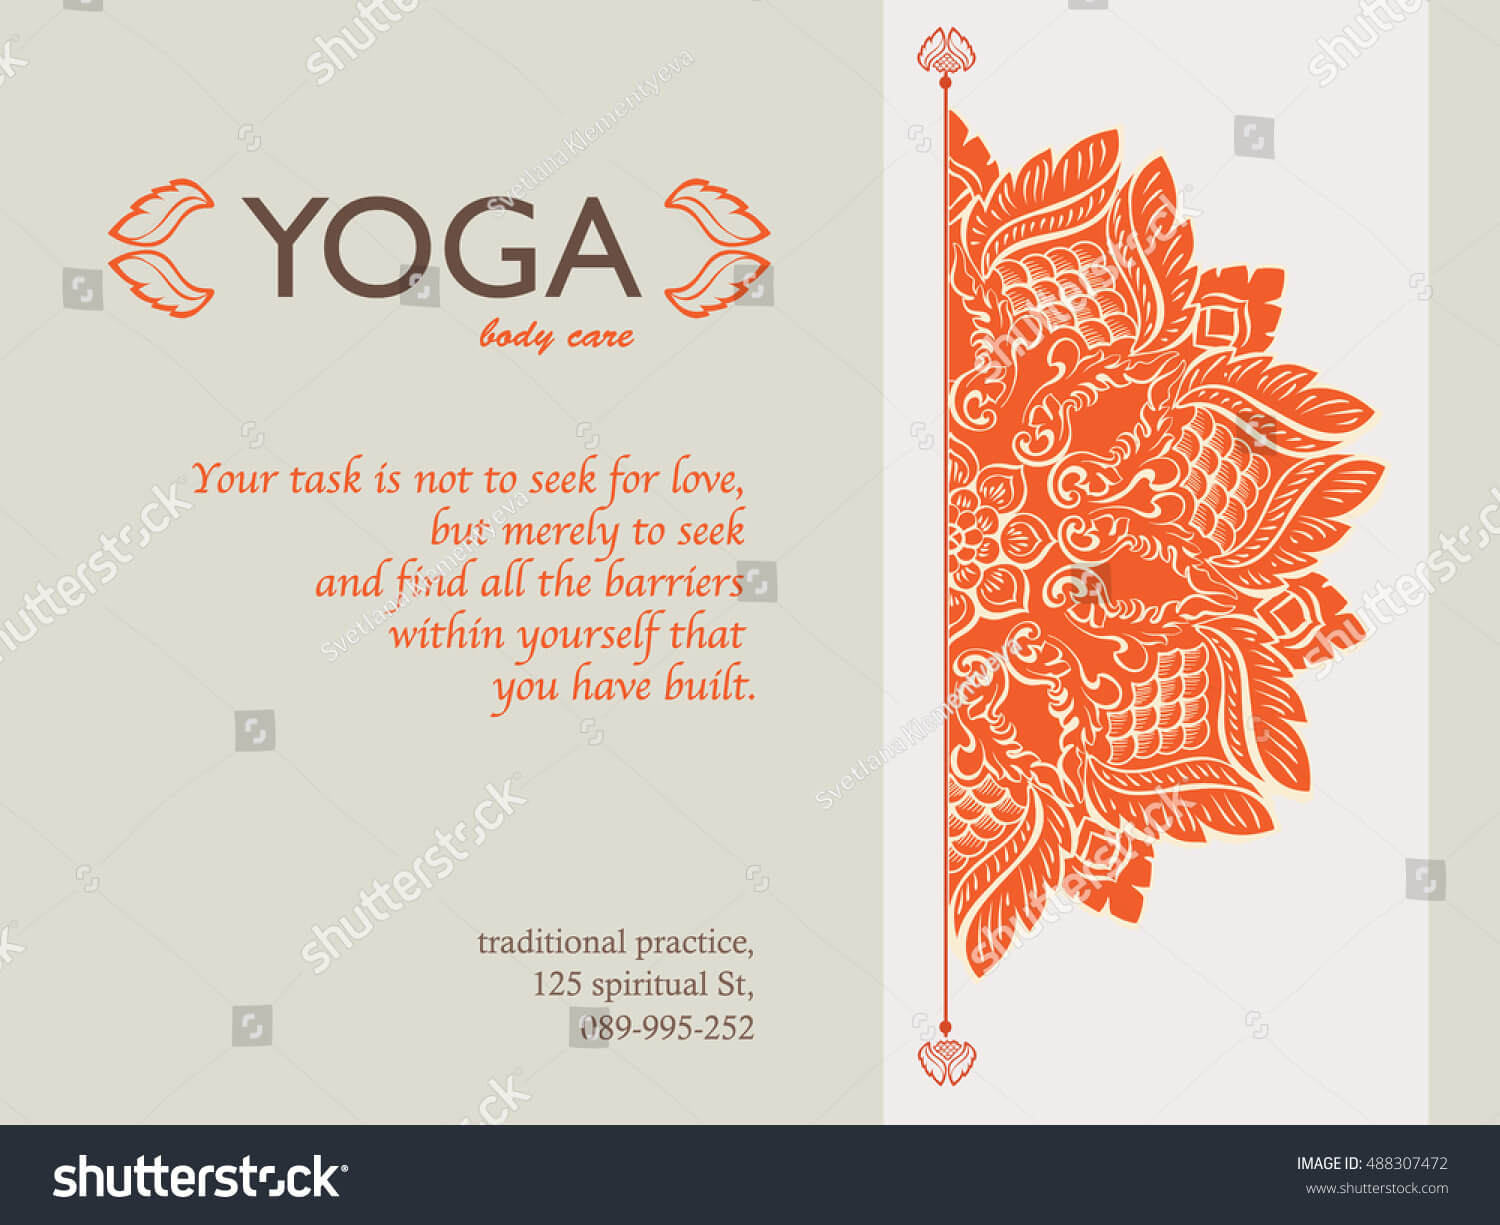 Yoga Gift Certificate Templates | Gift Certificate Templates With Yoga Gift Certificate Template Free